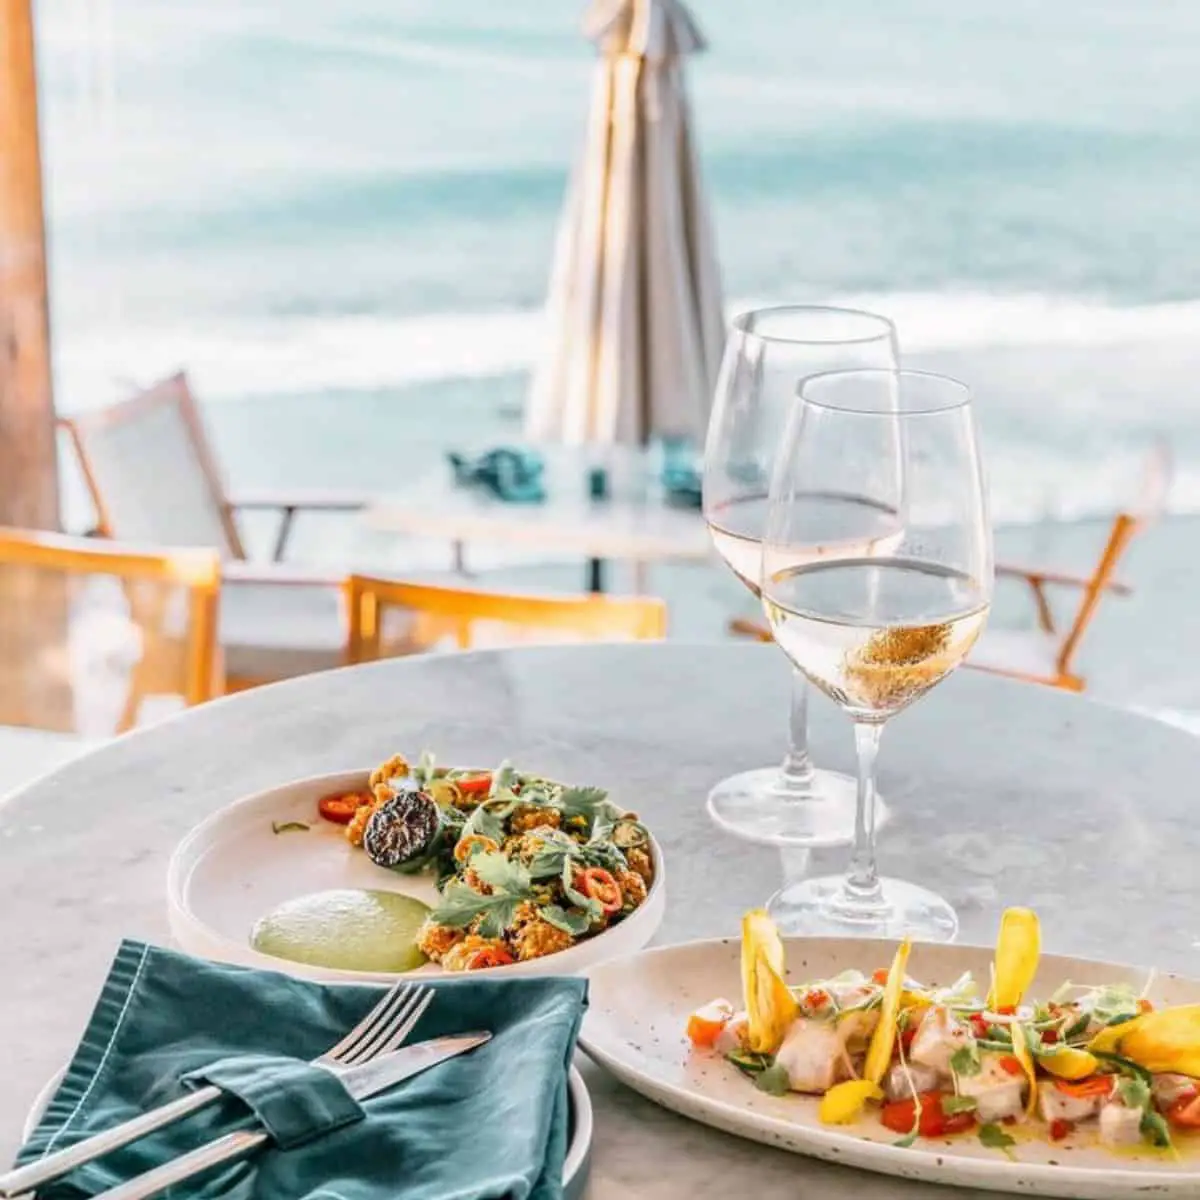 Delicious plates for lunch with two glasses of champagne, fork and knife on the side and a beach view at Ulu Cliffhouse